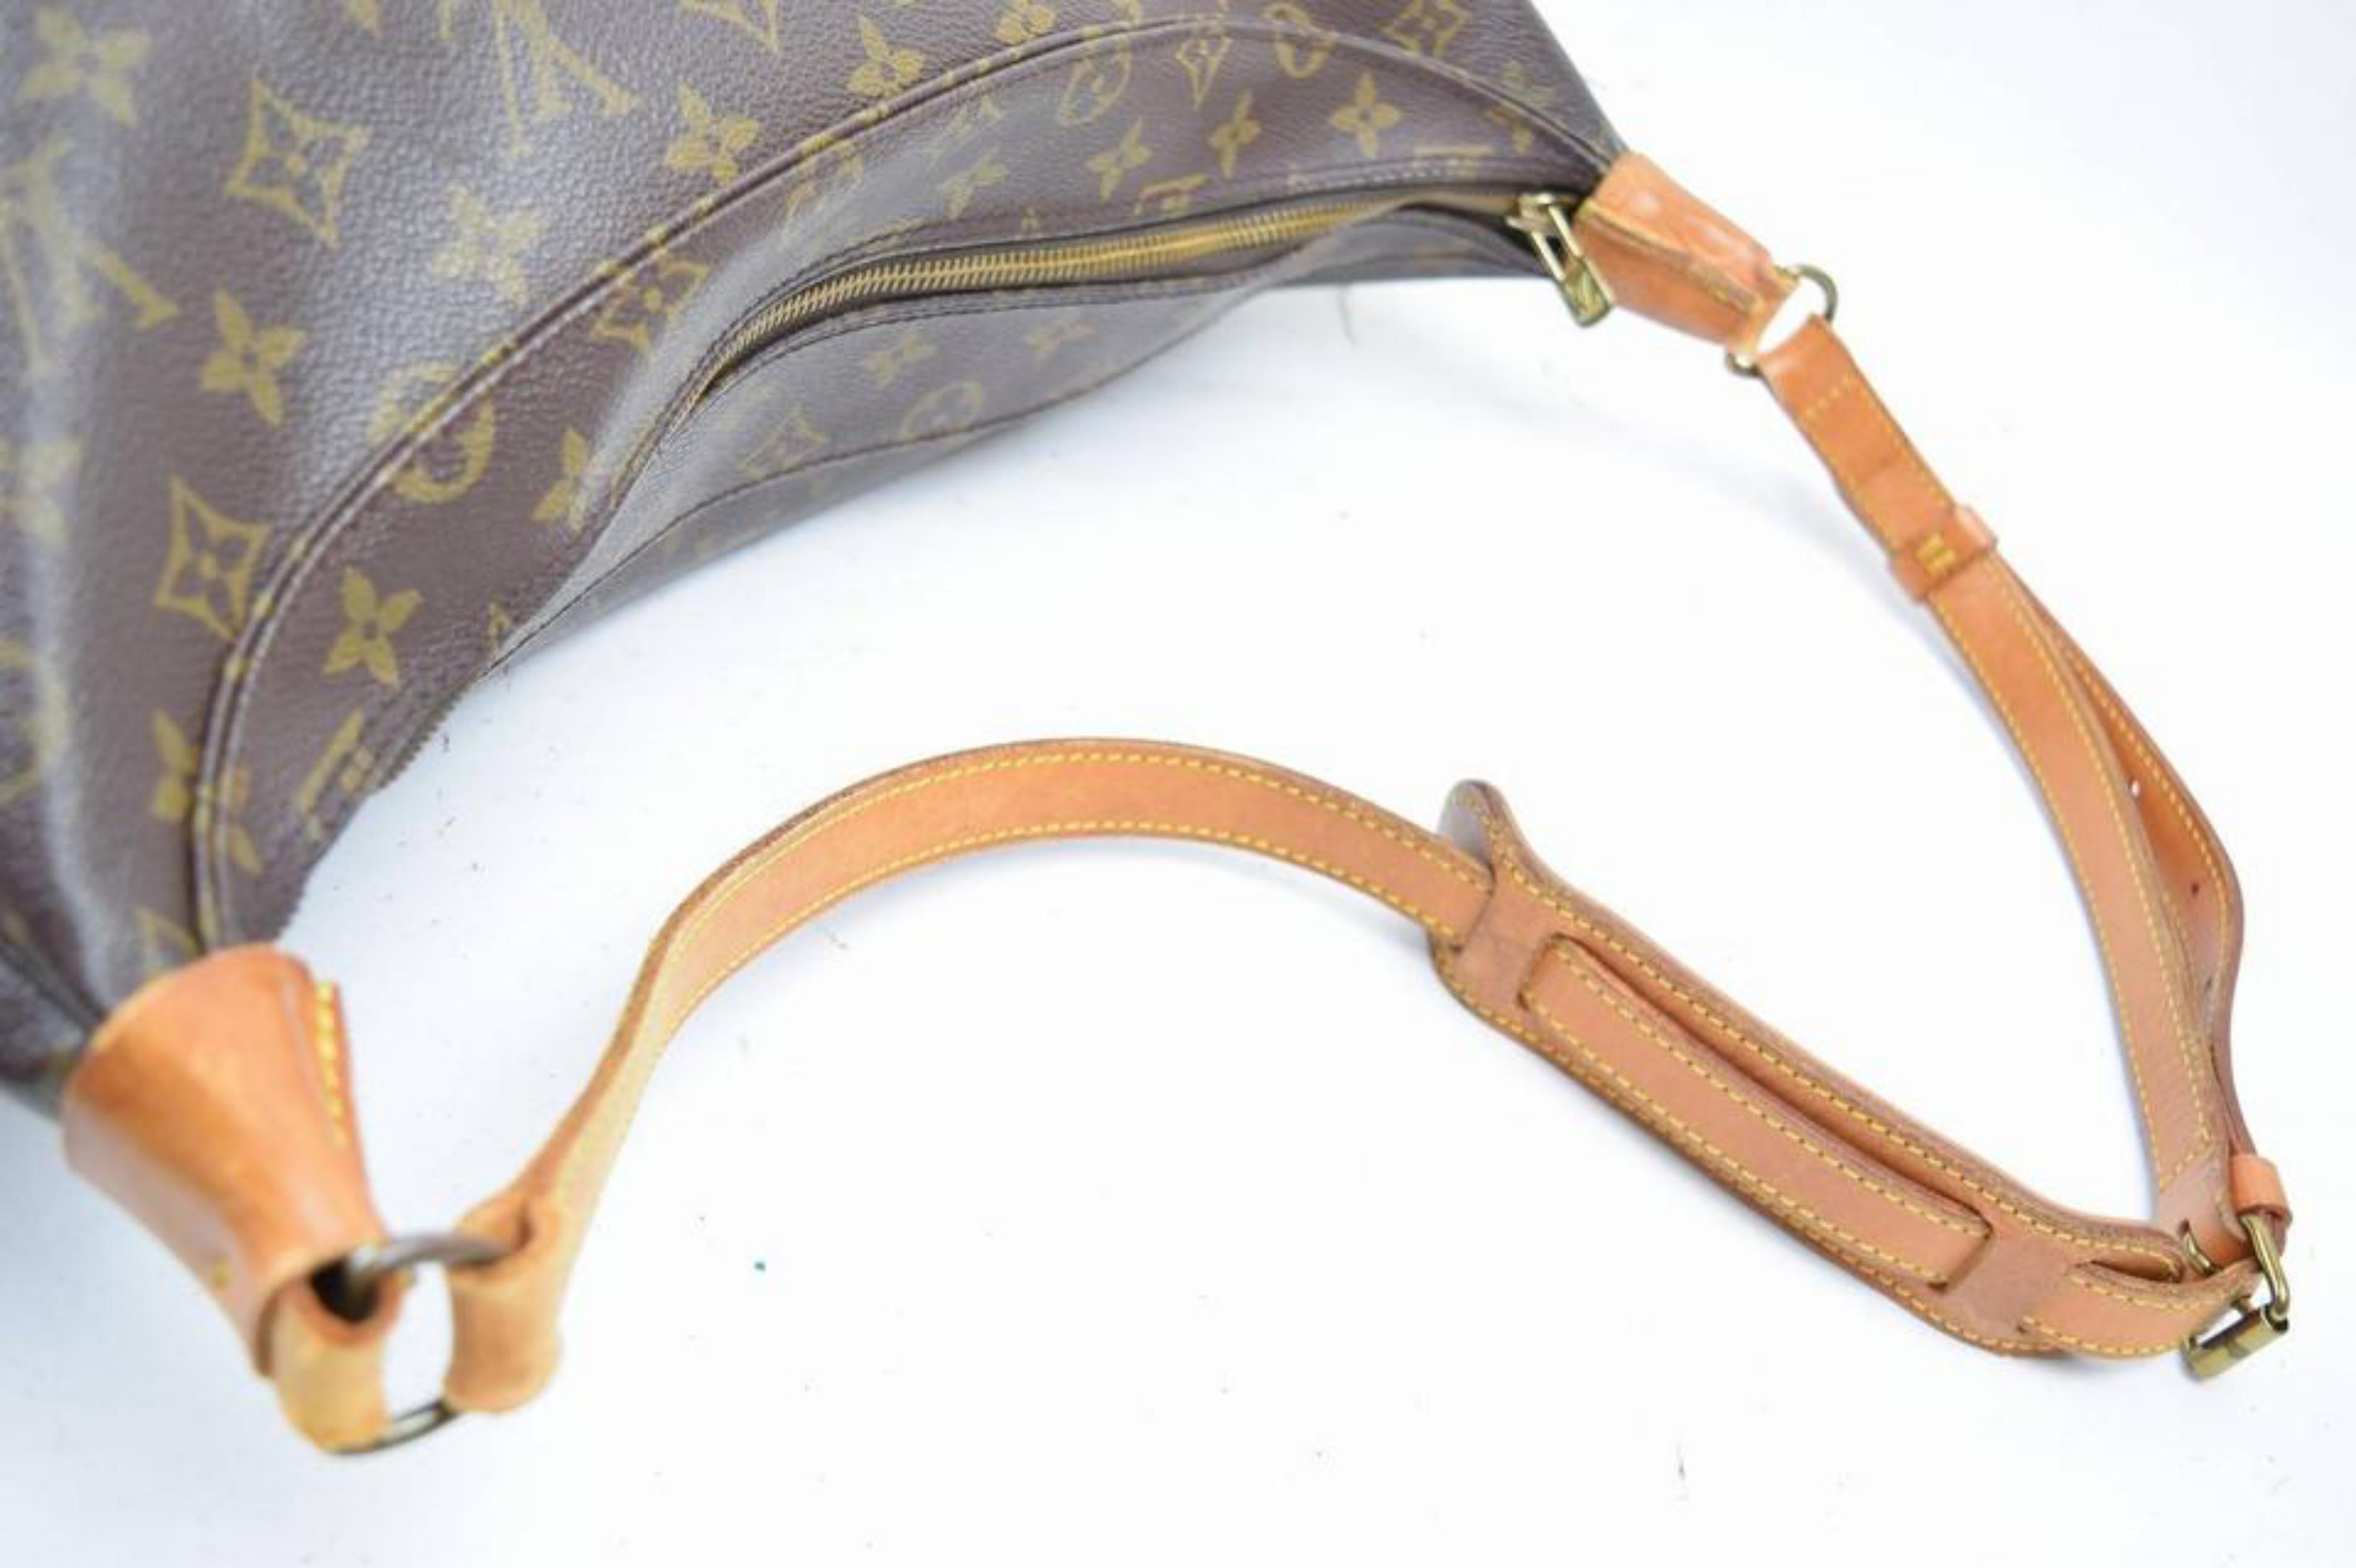 Louis Vuitton Boulogne Ballad Monogram R865843 Brown Coated Canvas Shoulder Bag In Good Condition For Sale In Forest Hills, NY